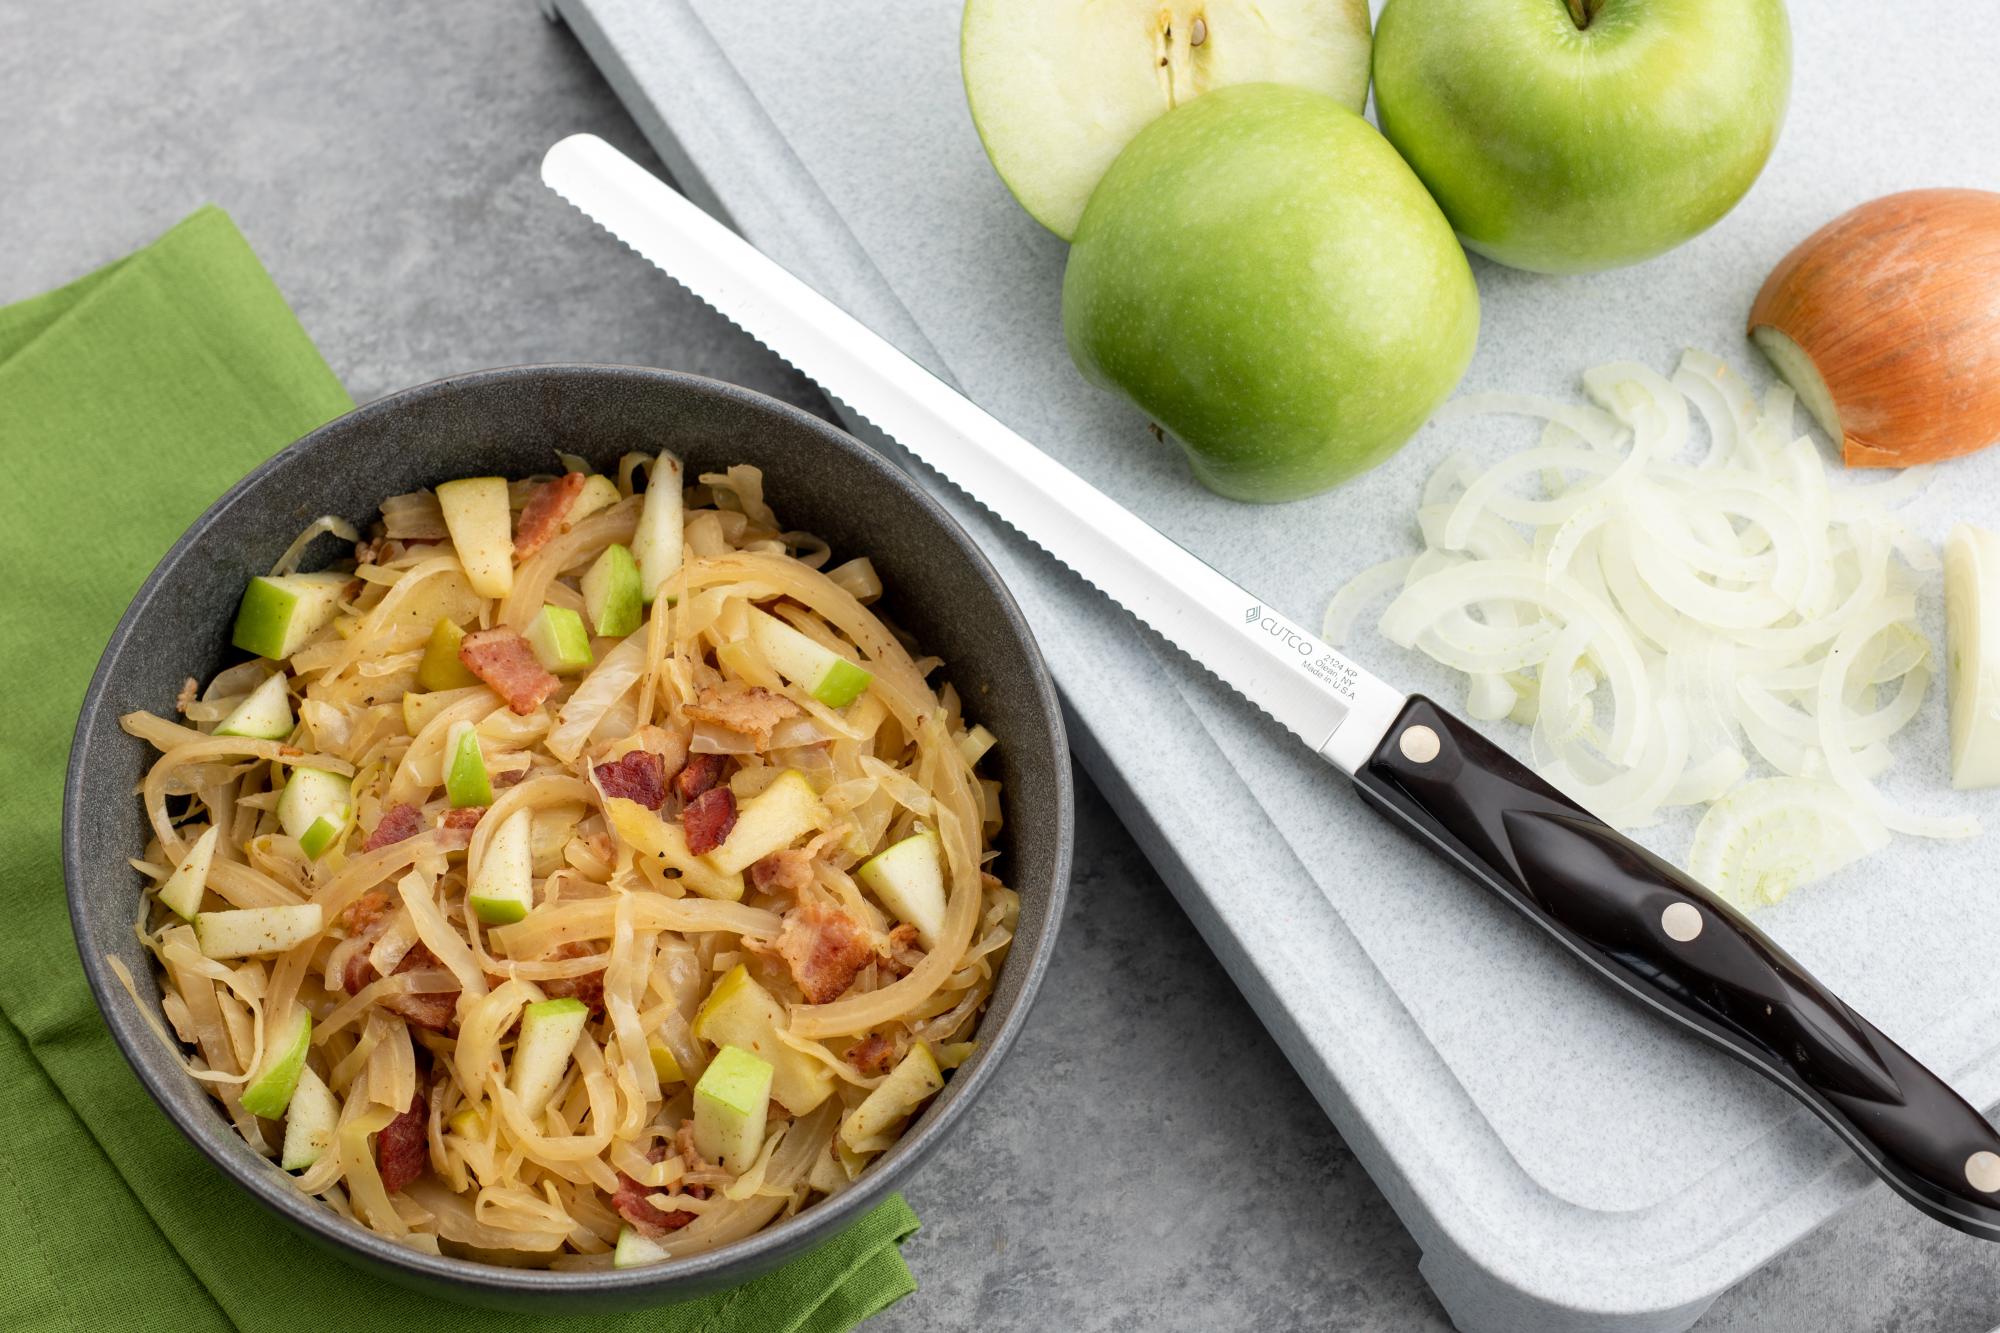 Braised Cabbage With Bacon and Apples